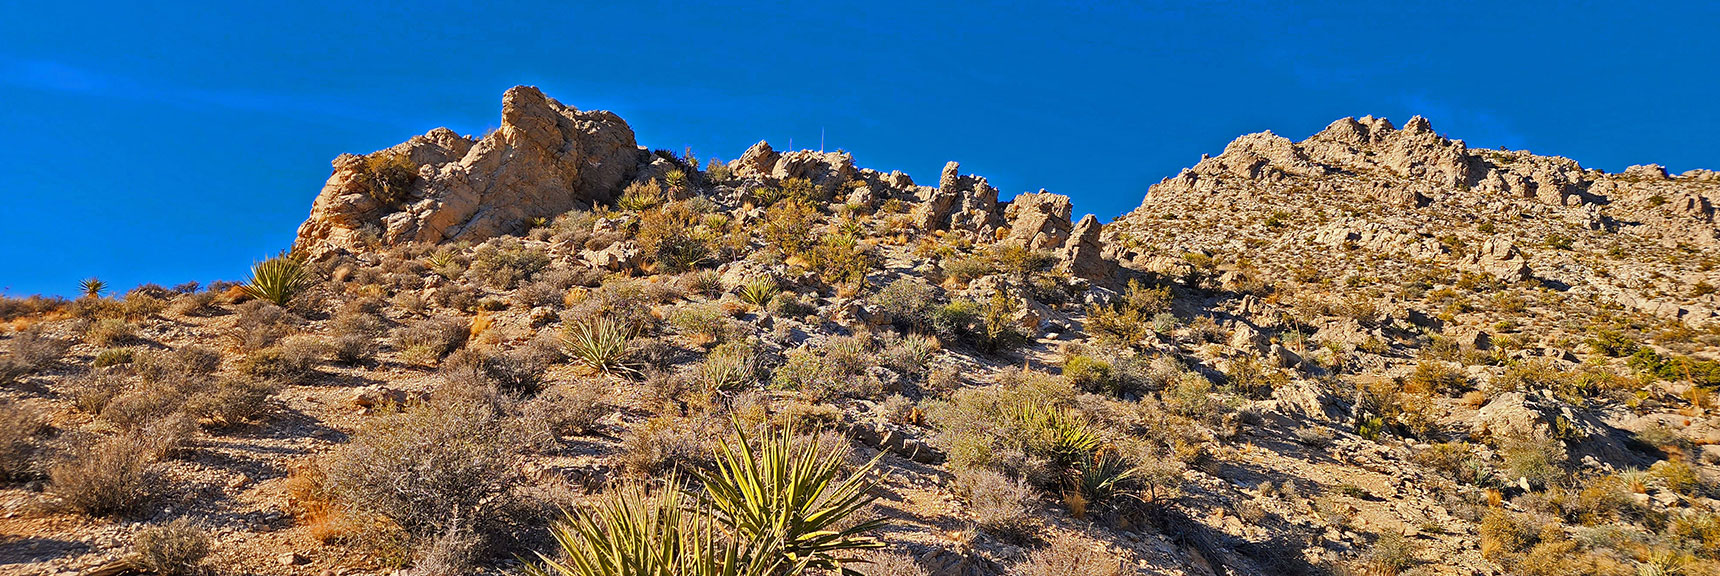 Leaving the Main Trail Toward the Alternate Left Ridgeline Summit Approach Route | Turtlehead Peak | Red Rock Canyon National Conservation Area, Nevada